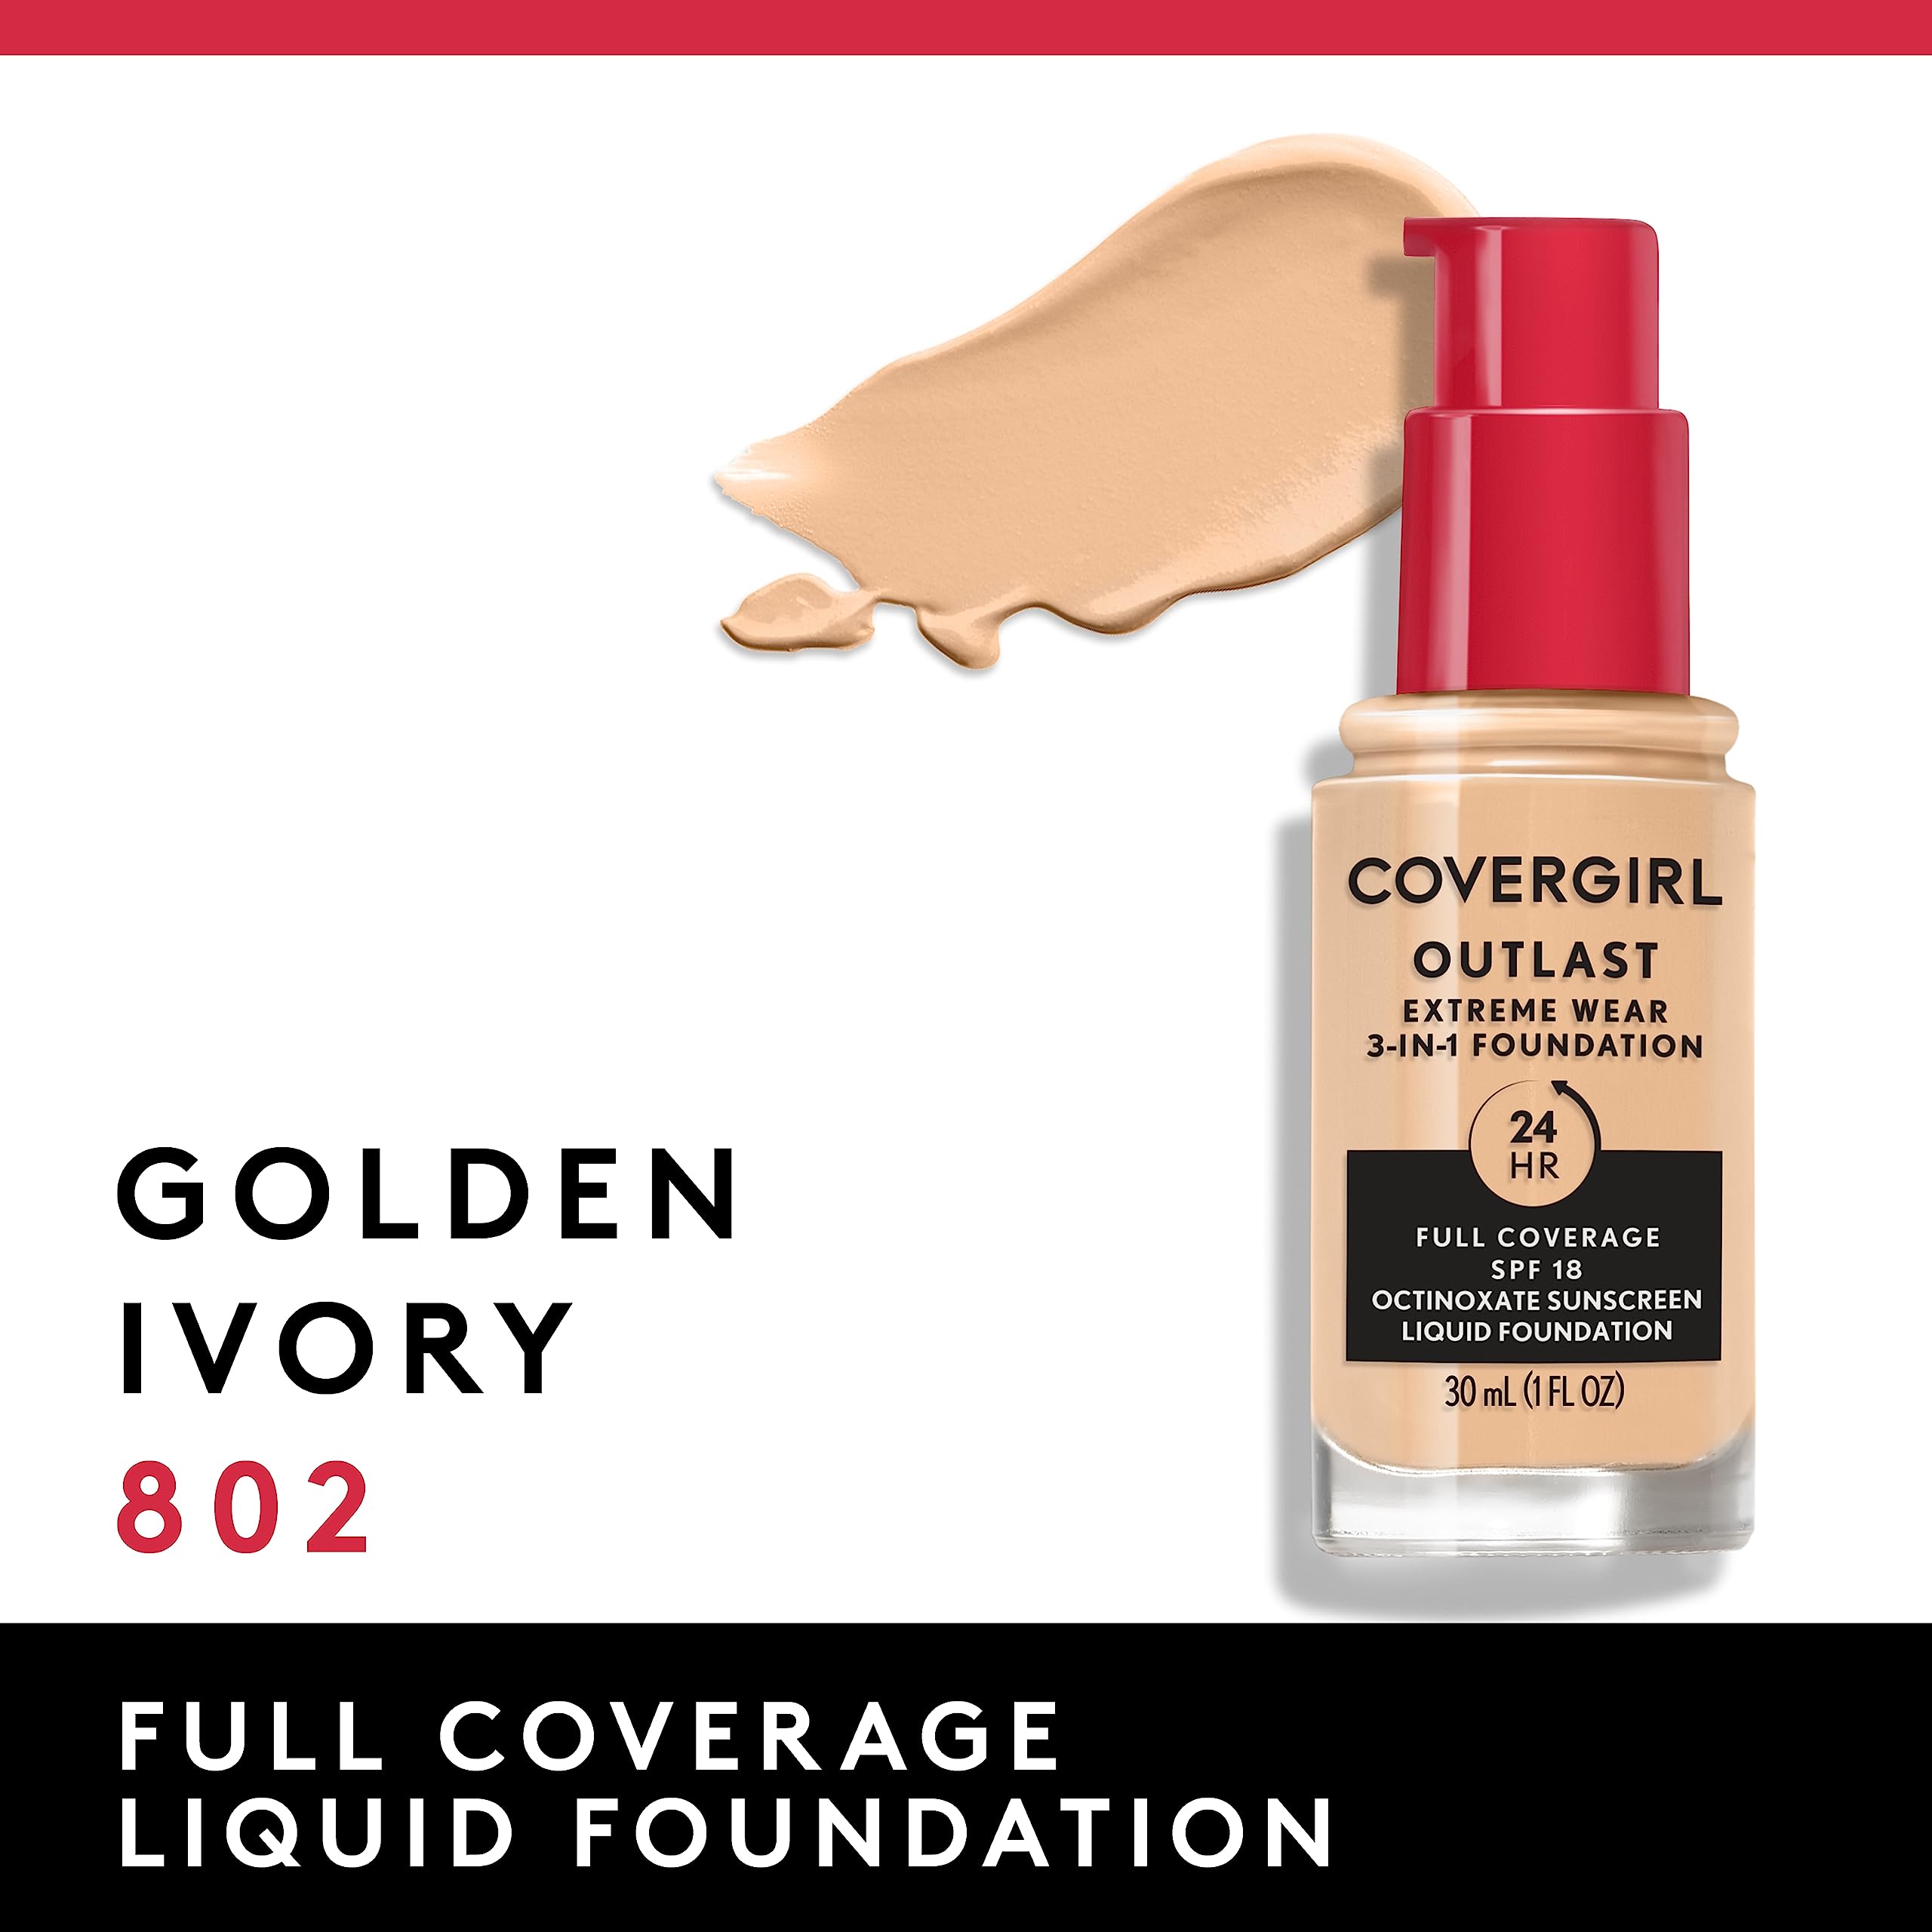 Covergirl Outlast Extreme Wear 3-in-1 Full Coverage Liquid Foundation, SPF 18 Sunscreen, Golden Ivory, 1 Fl. Oz.